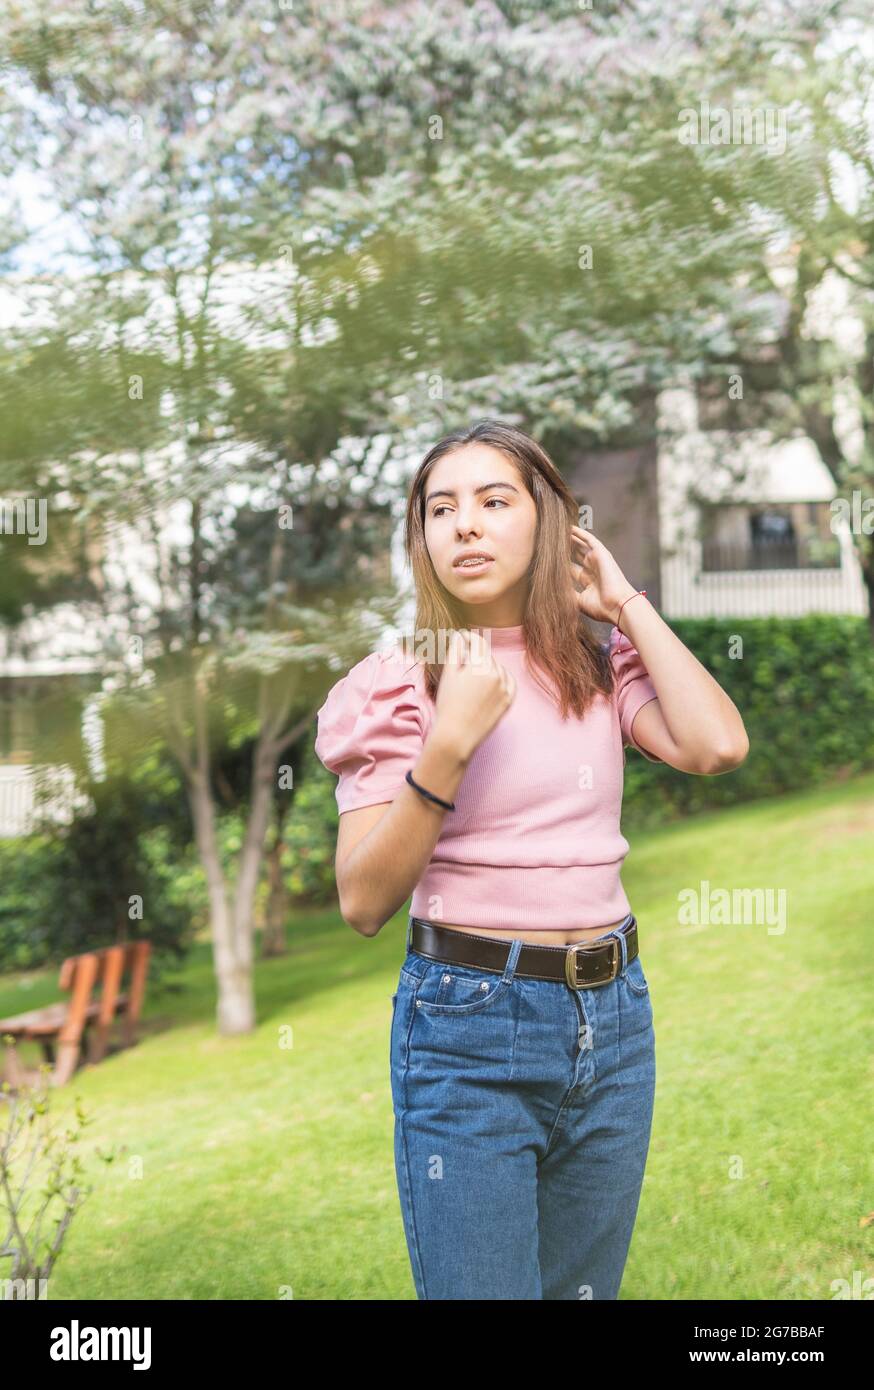 Outdoor portrait of a Latina teen girl with braces adjusting her straight hair with her hands in pink blouse and jeans Stock Photo